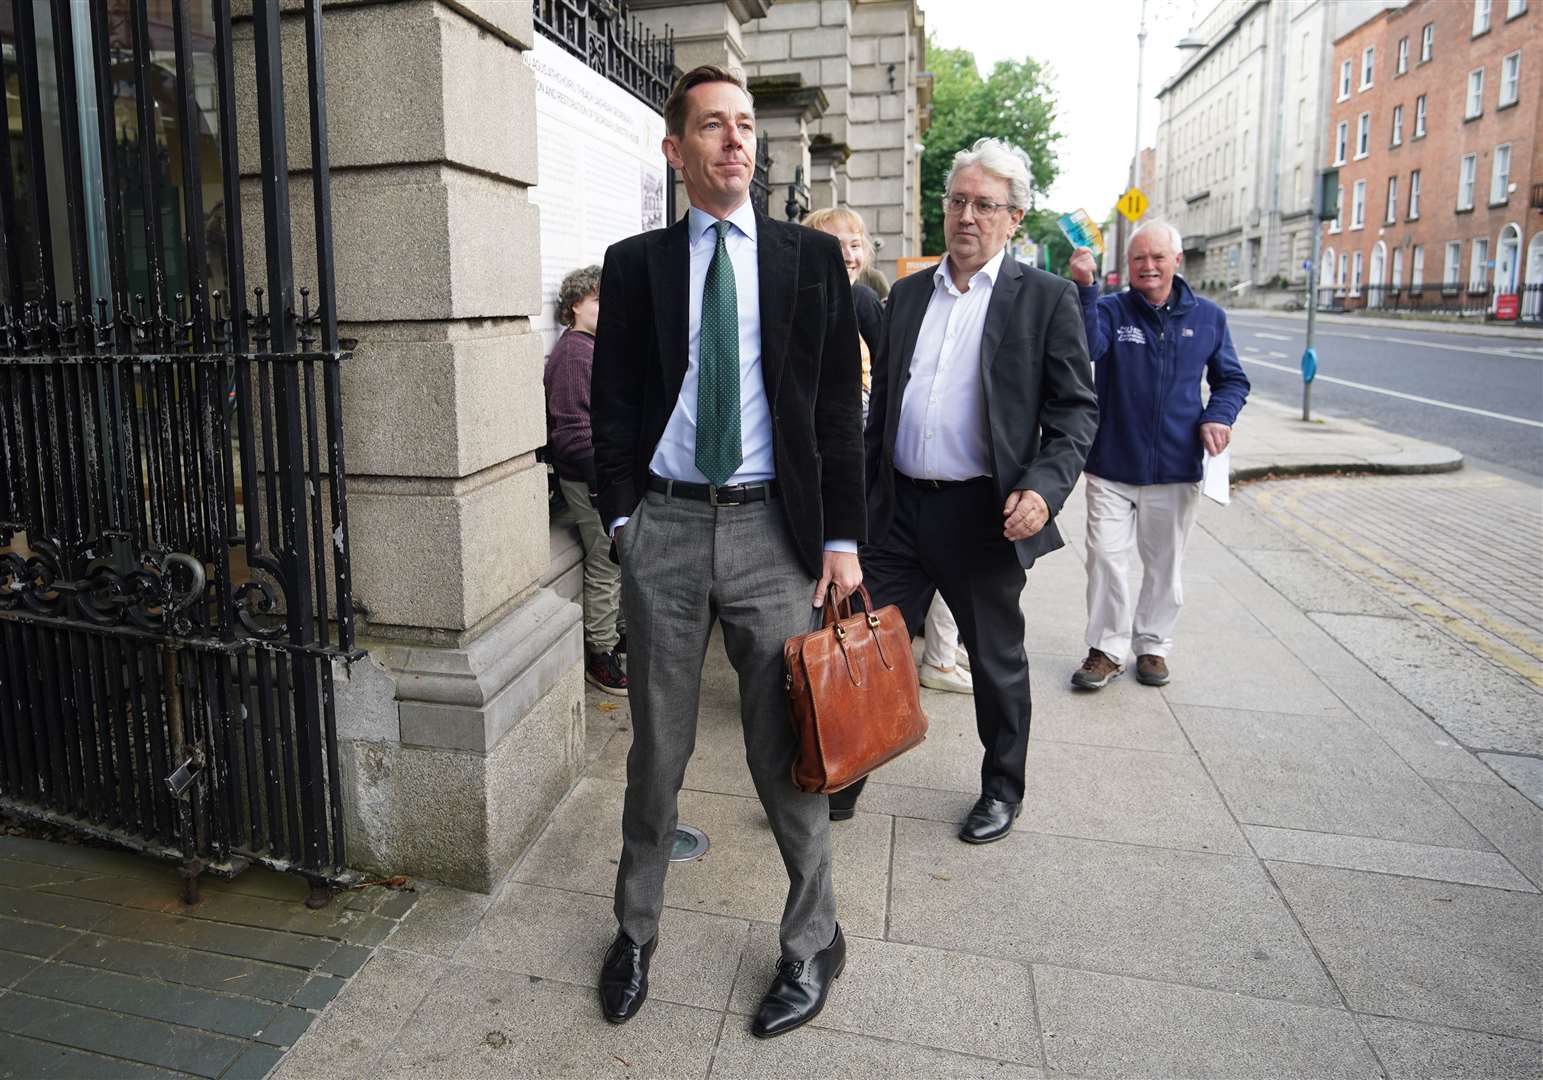 RTE presenter Ryan Tubridy arrives at Leinster House (Niall Carson/PA)